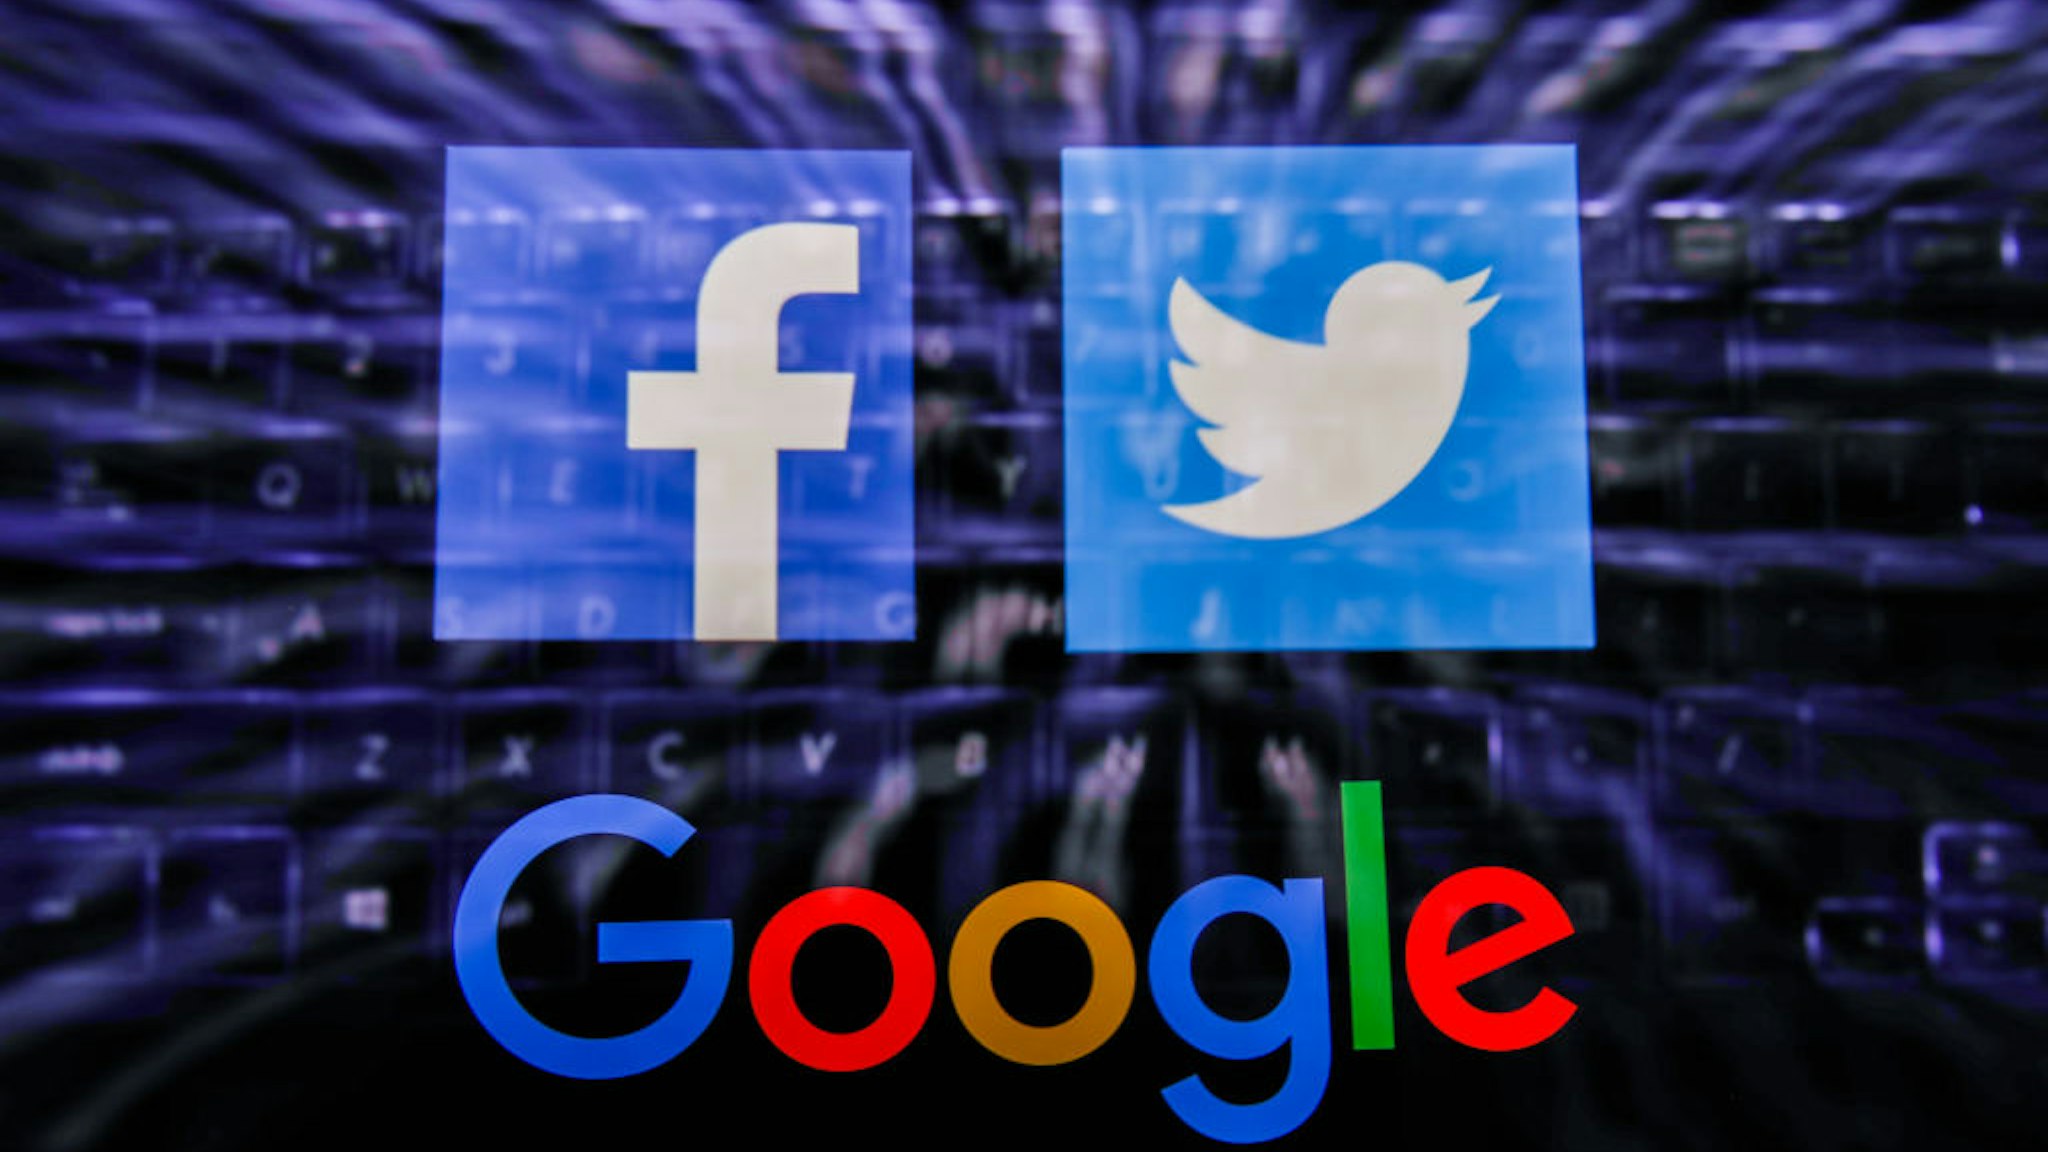 Facebook, Twitter and Google logos displayed on a phone screen and keyboard are seen in this multiple exposure illustration photo taken in Poland on June 14, 2020. European Commission officials said that Facebook, Twitter and Google should provide monthly fake news reports to prevent fake news about coronavirus pandemic. (Photo Illustration by Jakub Porzycki/NurPhoto via Getty Images)